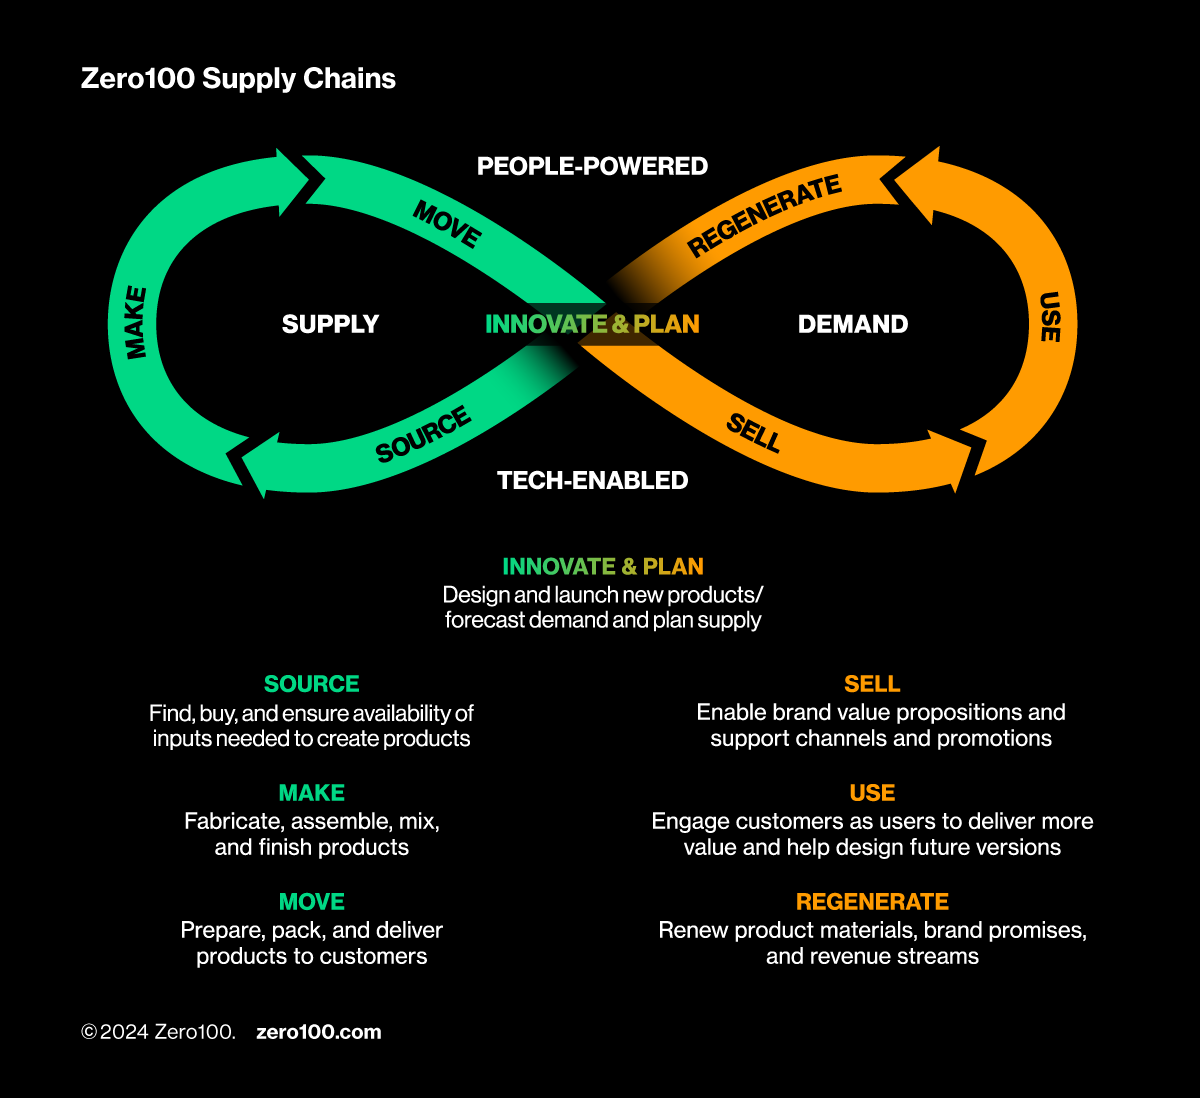 Graphic showing the Zero100 Loop connecting supply and demand.
Source: Zero100.